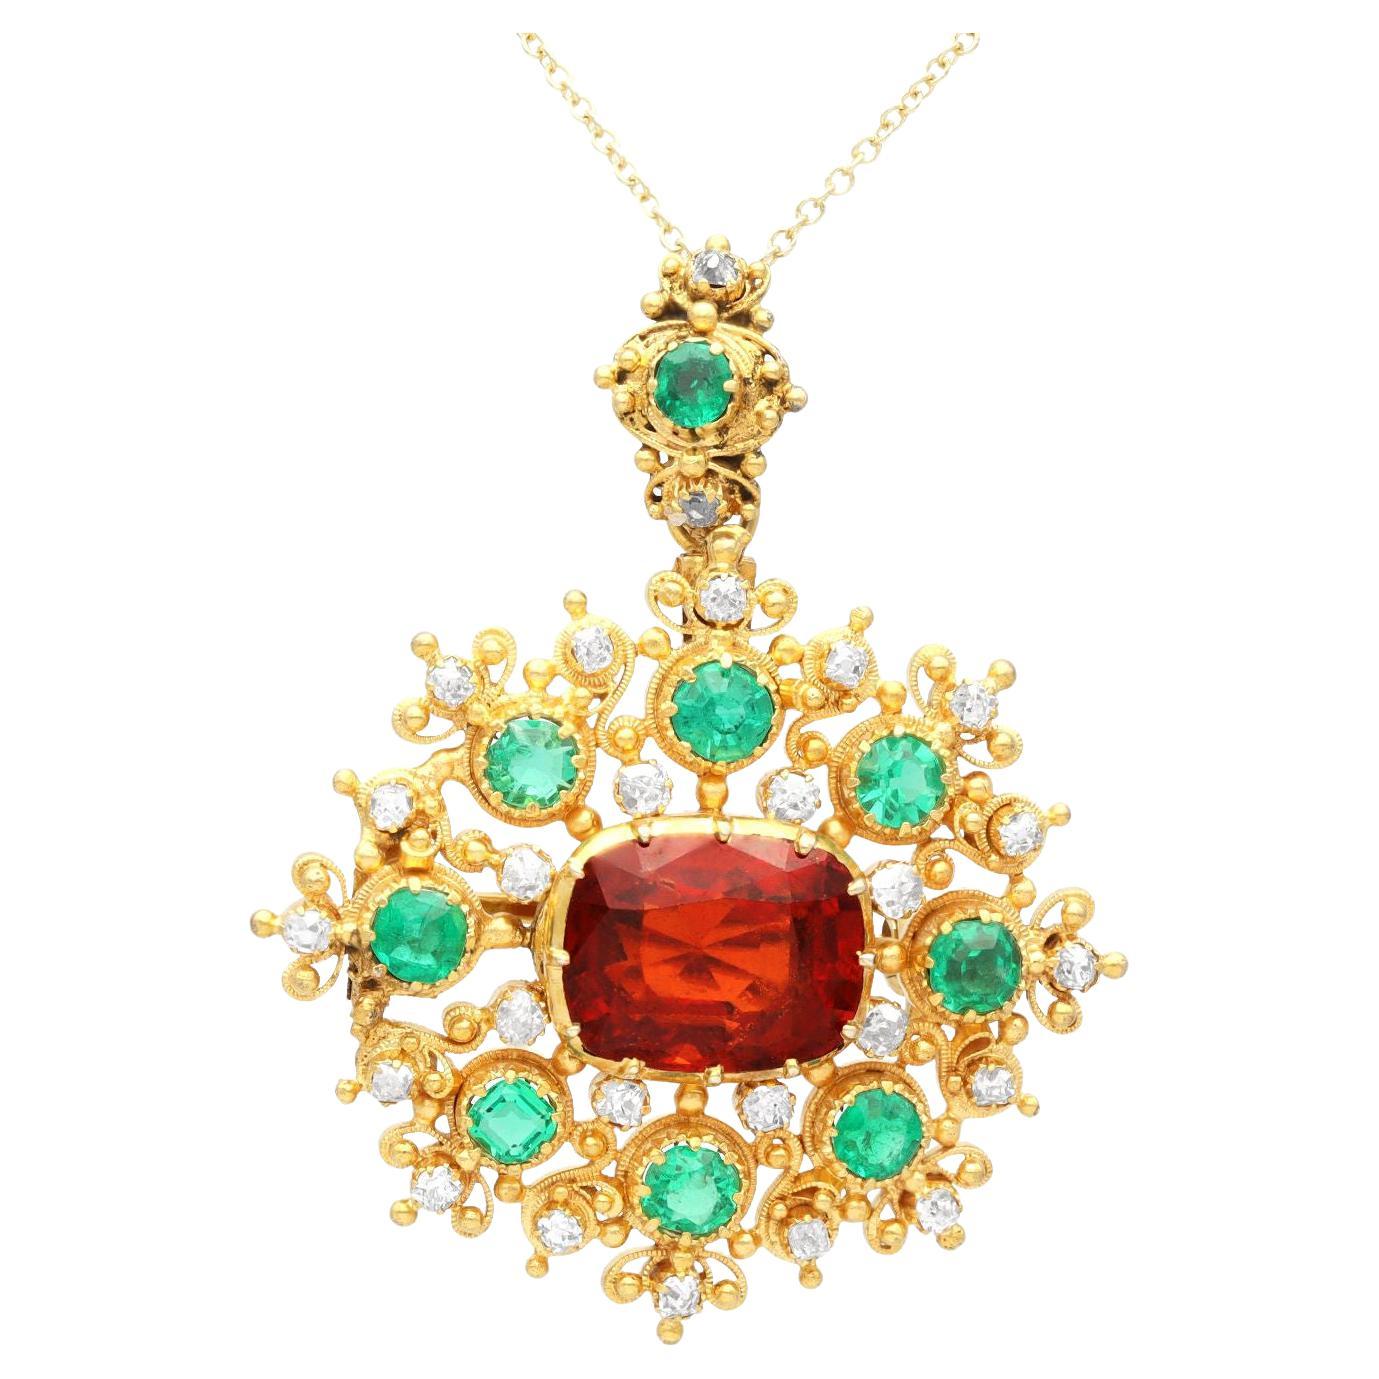 Antique 4.10ct Garnet 1.36ct Emerald and Diamond 18k Yellow Gold Pendant/Brooch For Sale